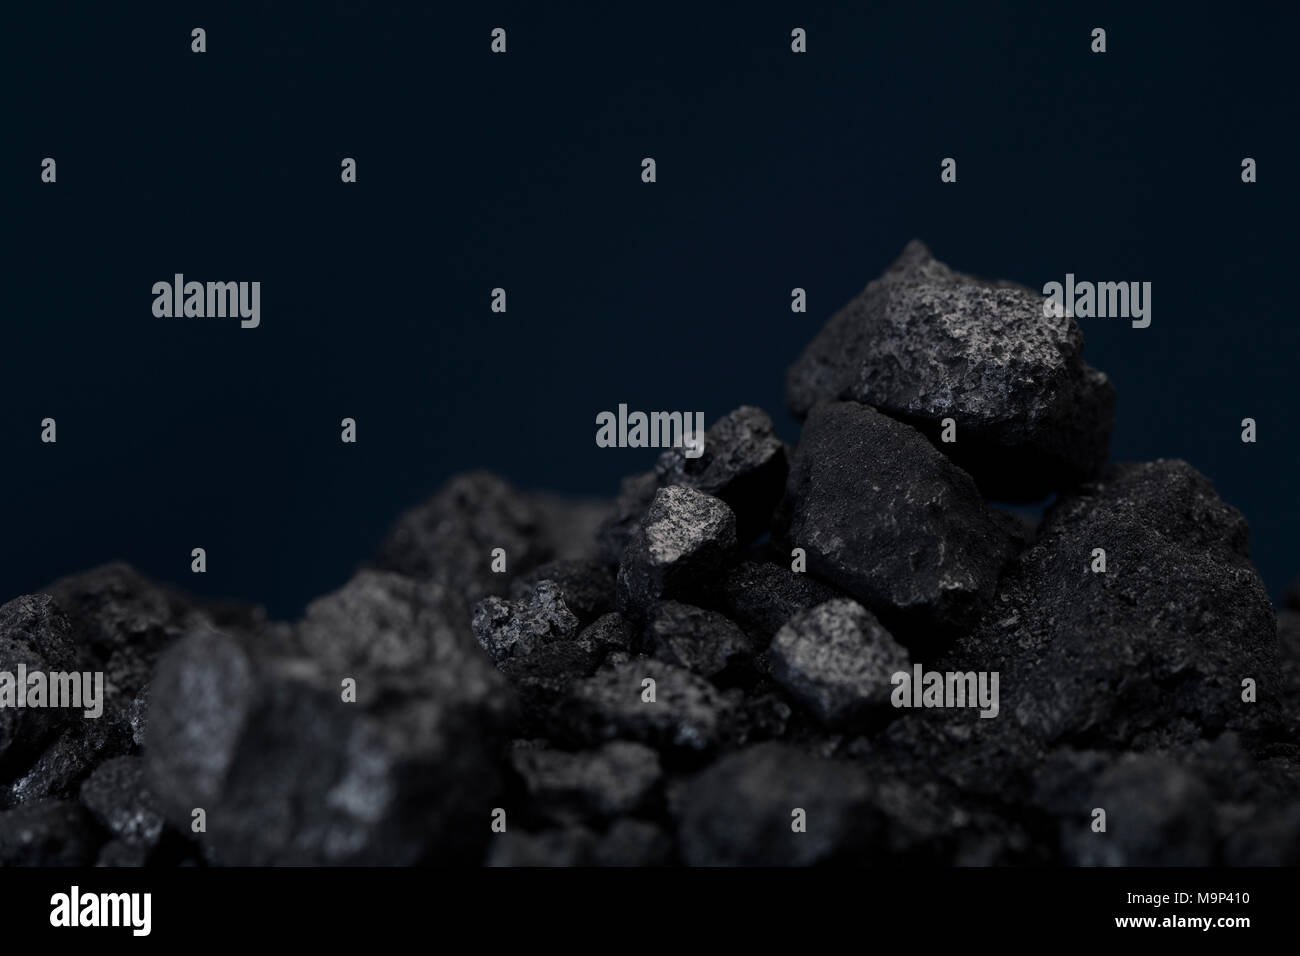 Petroleum coke is a carbonaceous material that results from the coking process during upgrading bitumen. Petroleum coke has uses in the electric power and industrial sectors. Stock Photo